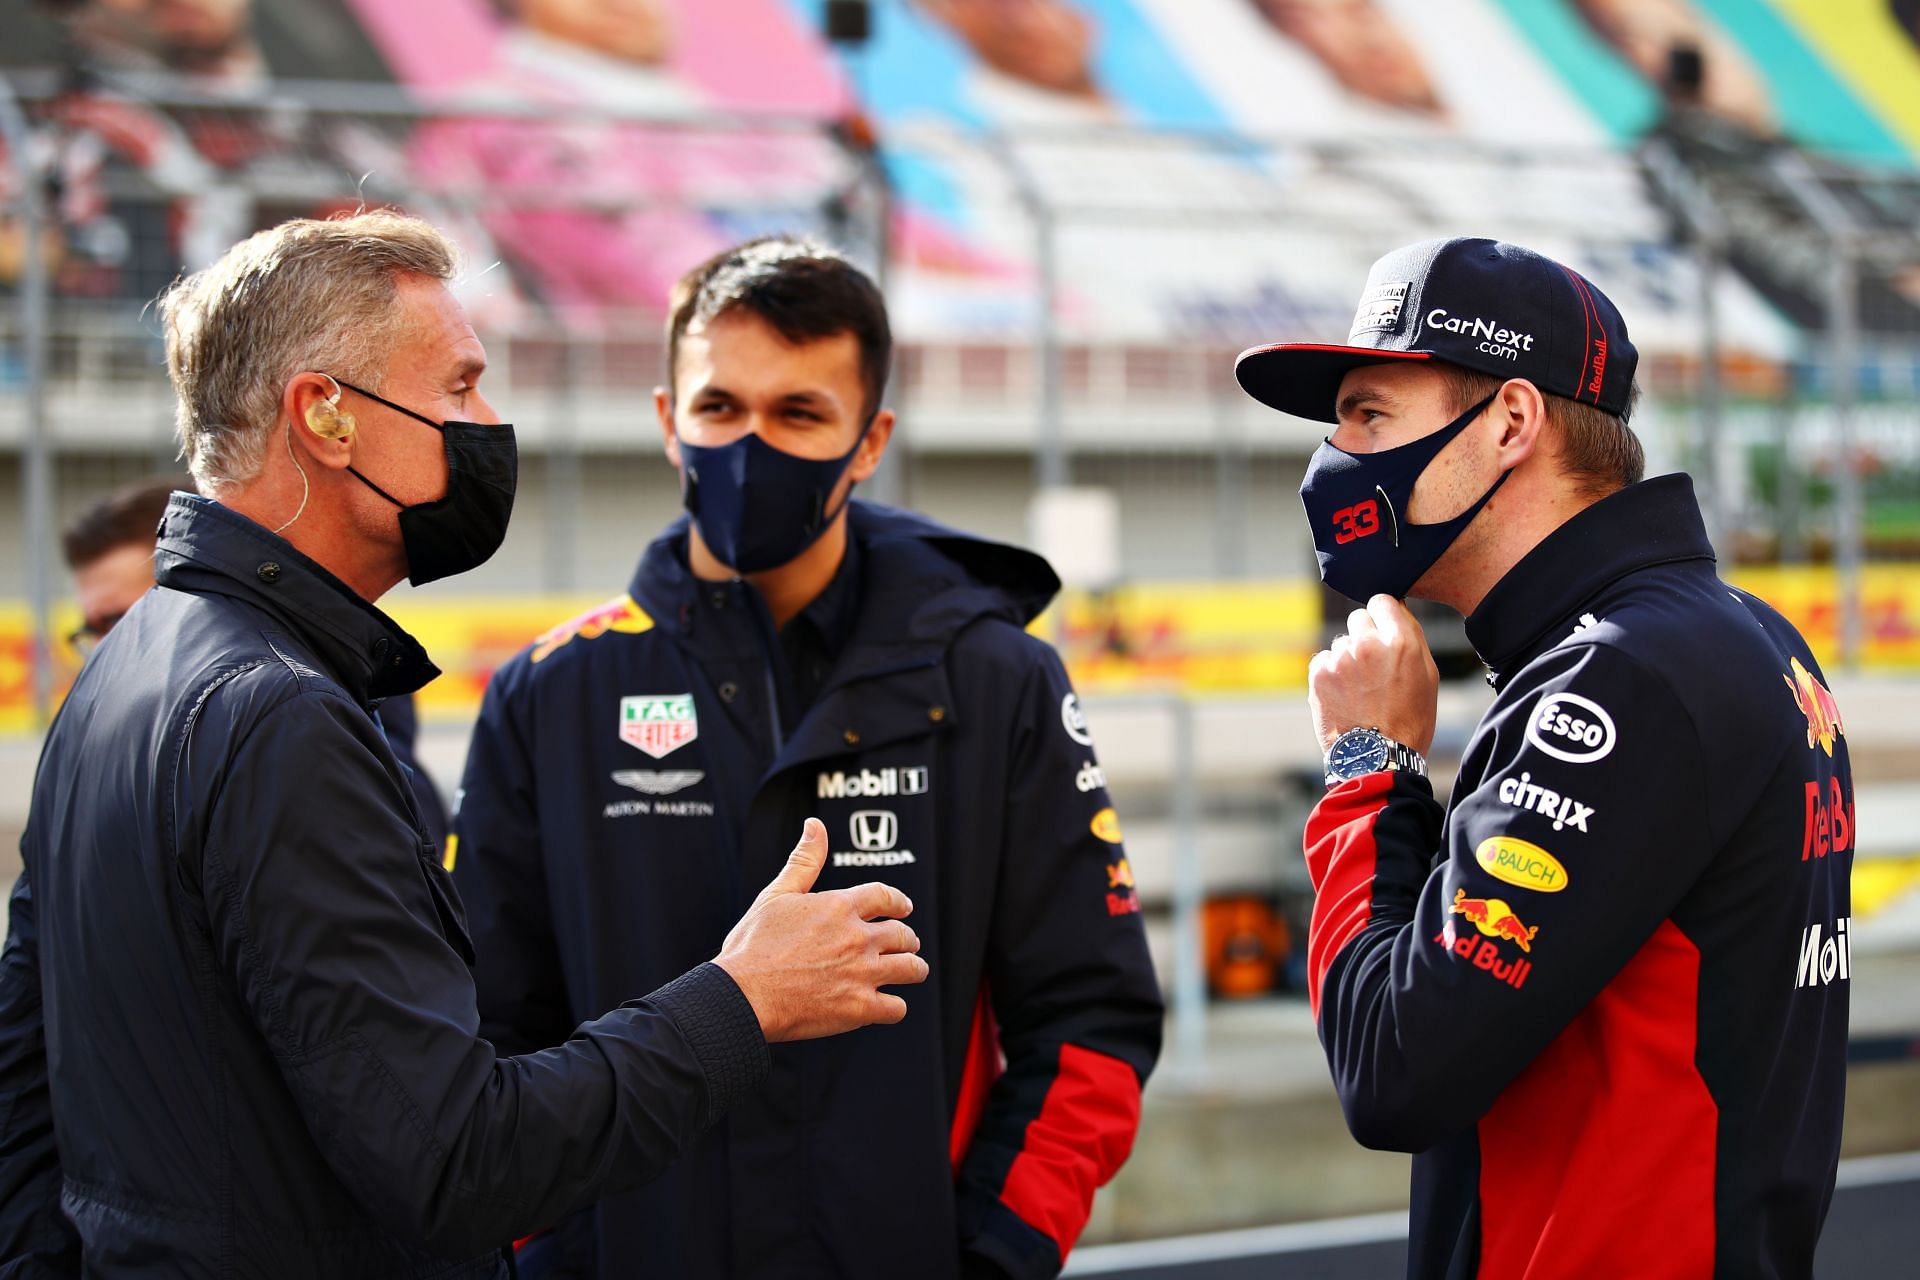 (L-R) David Coulthard talks with Alex Albon and Max Verstappen in the pitlane. (Photo by Bryn Lennon/Getty Images